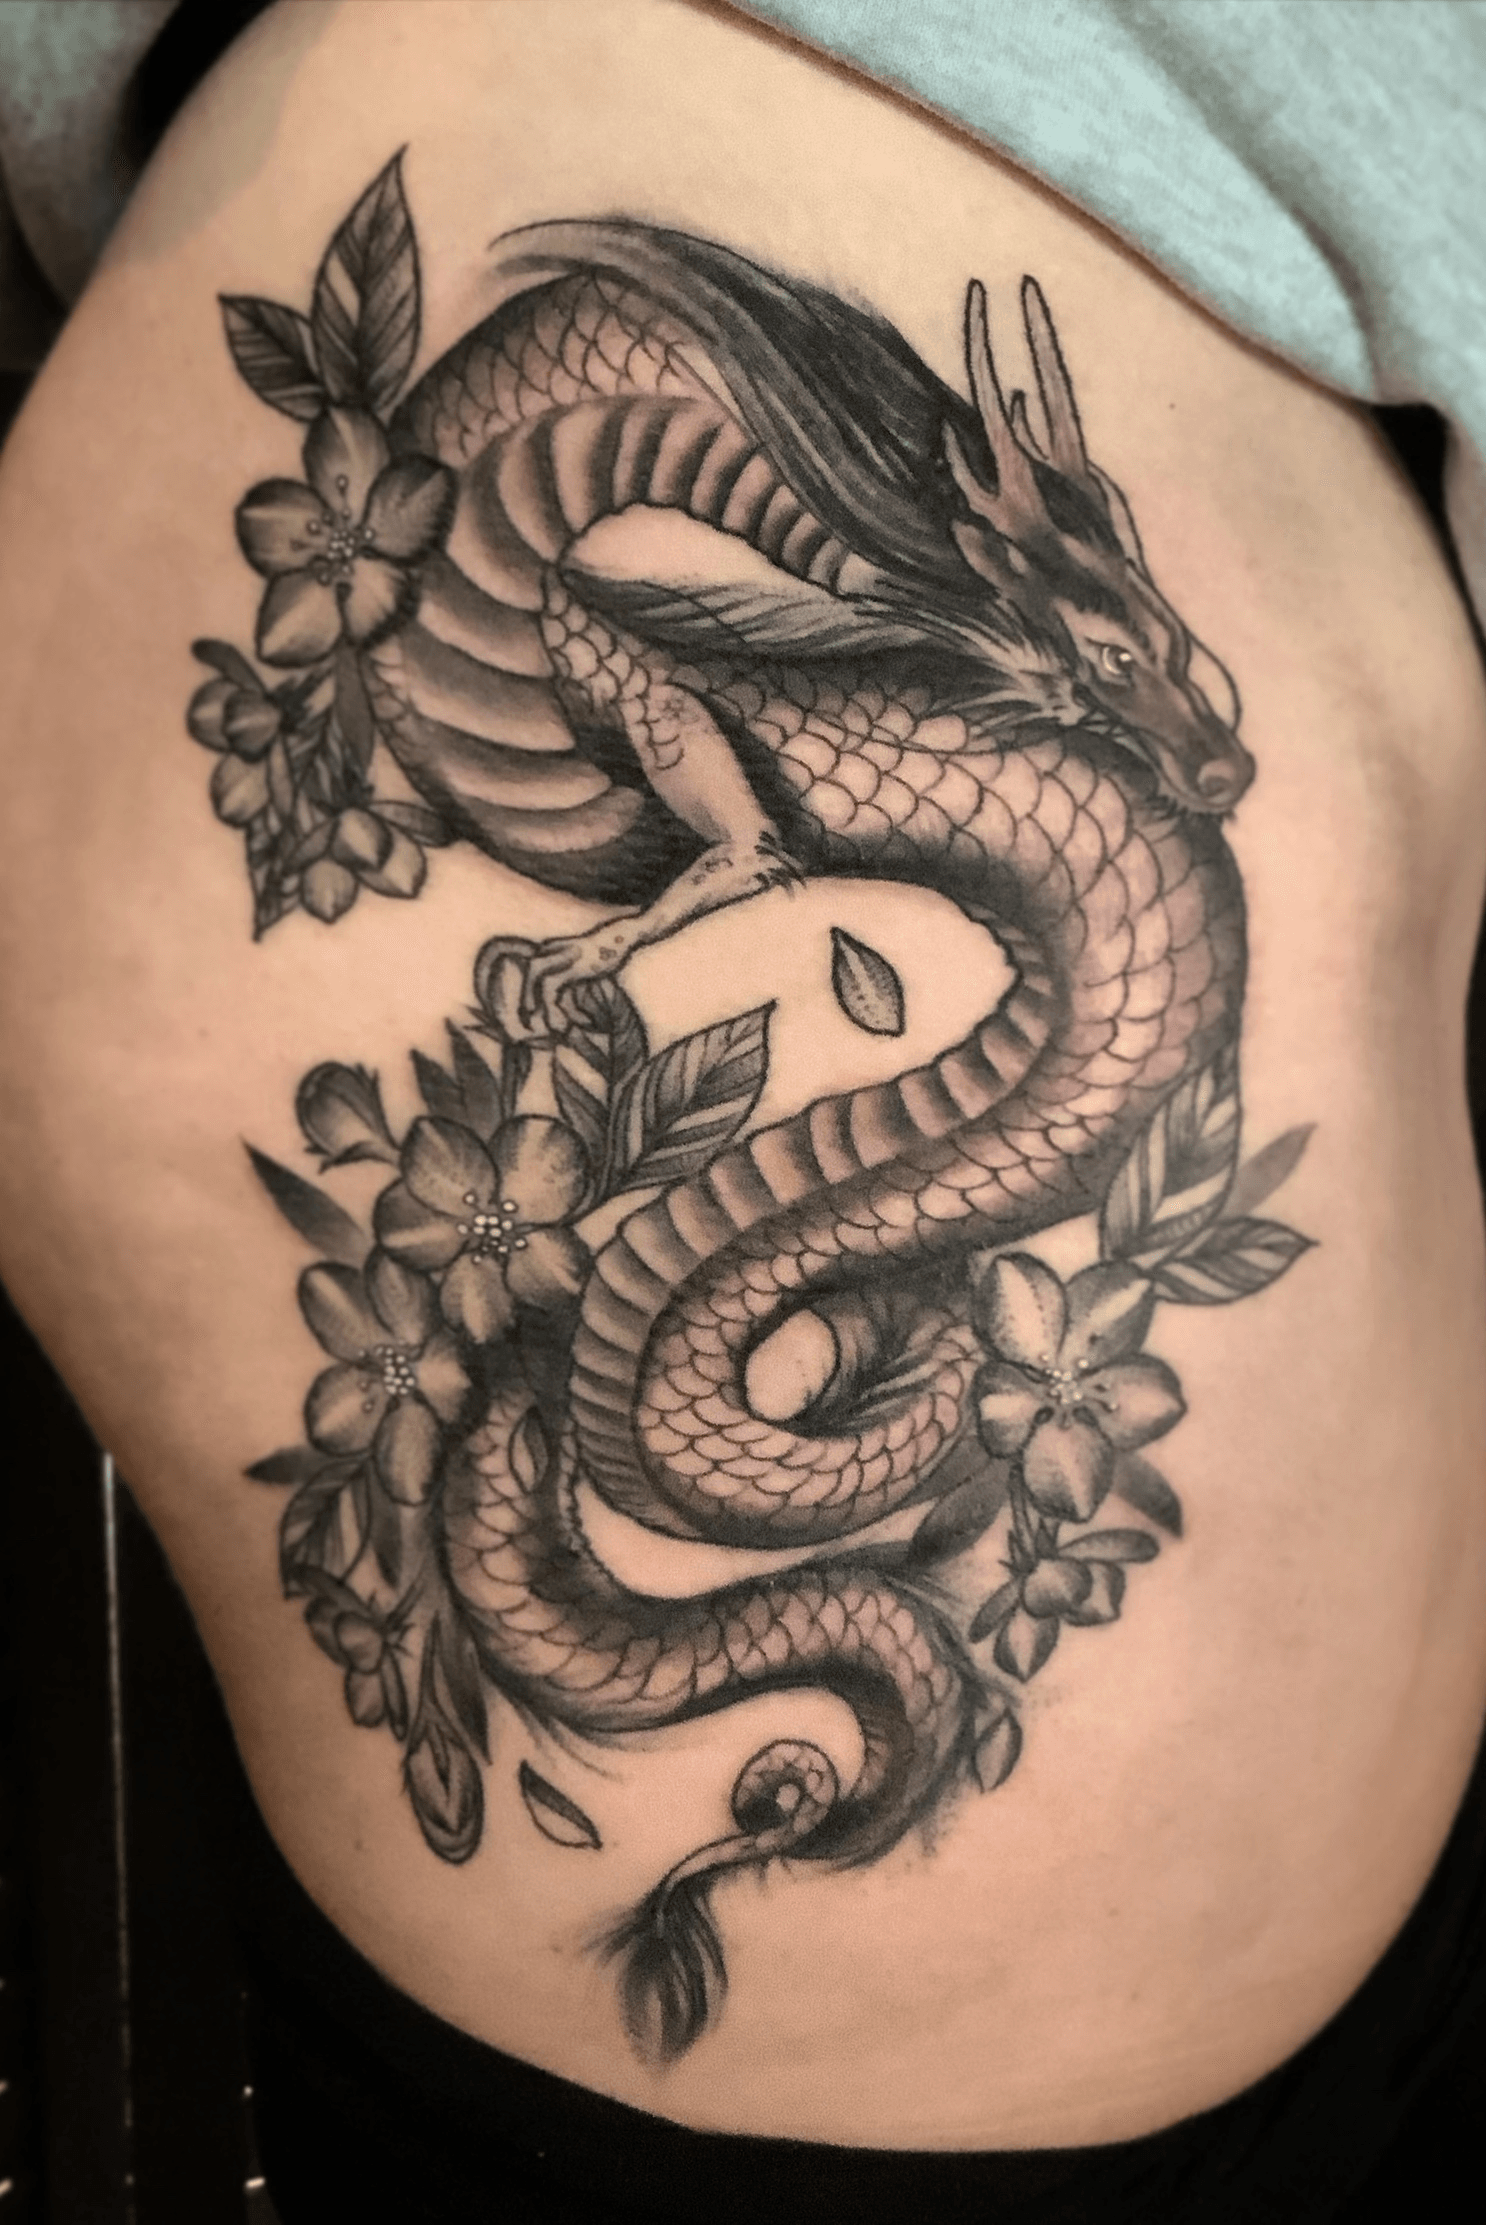 20 Amazing Dragon Tattoo Ideas For Men And Women